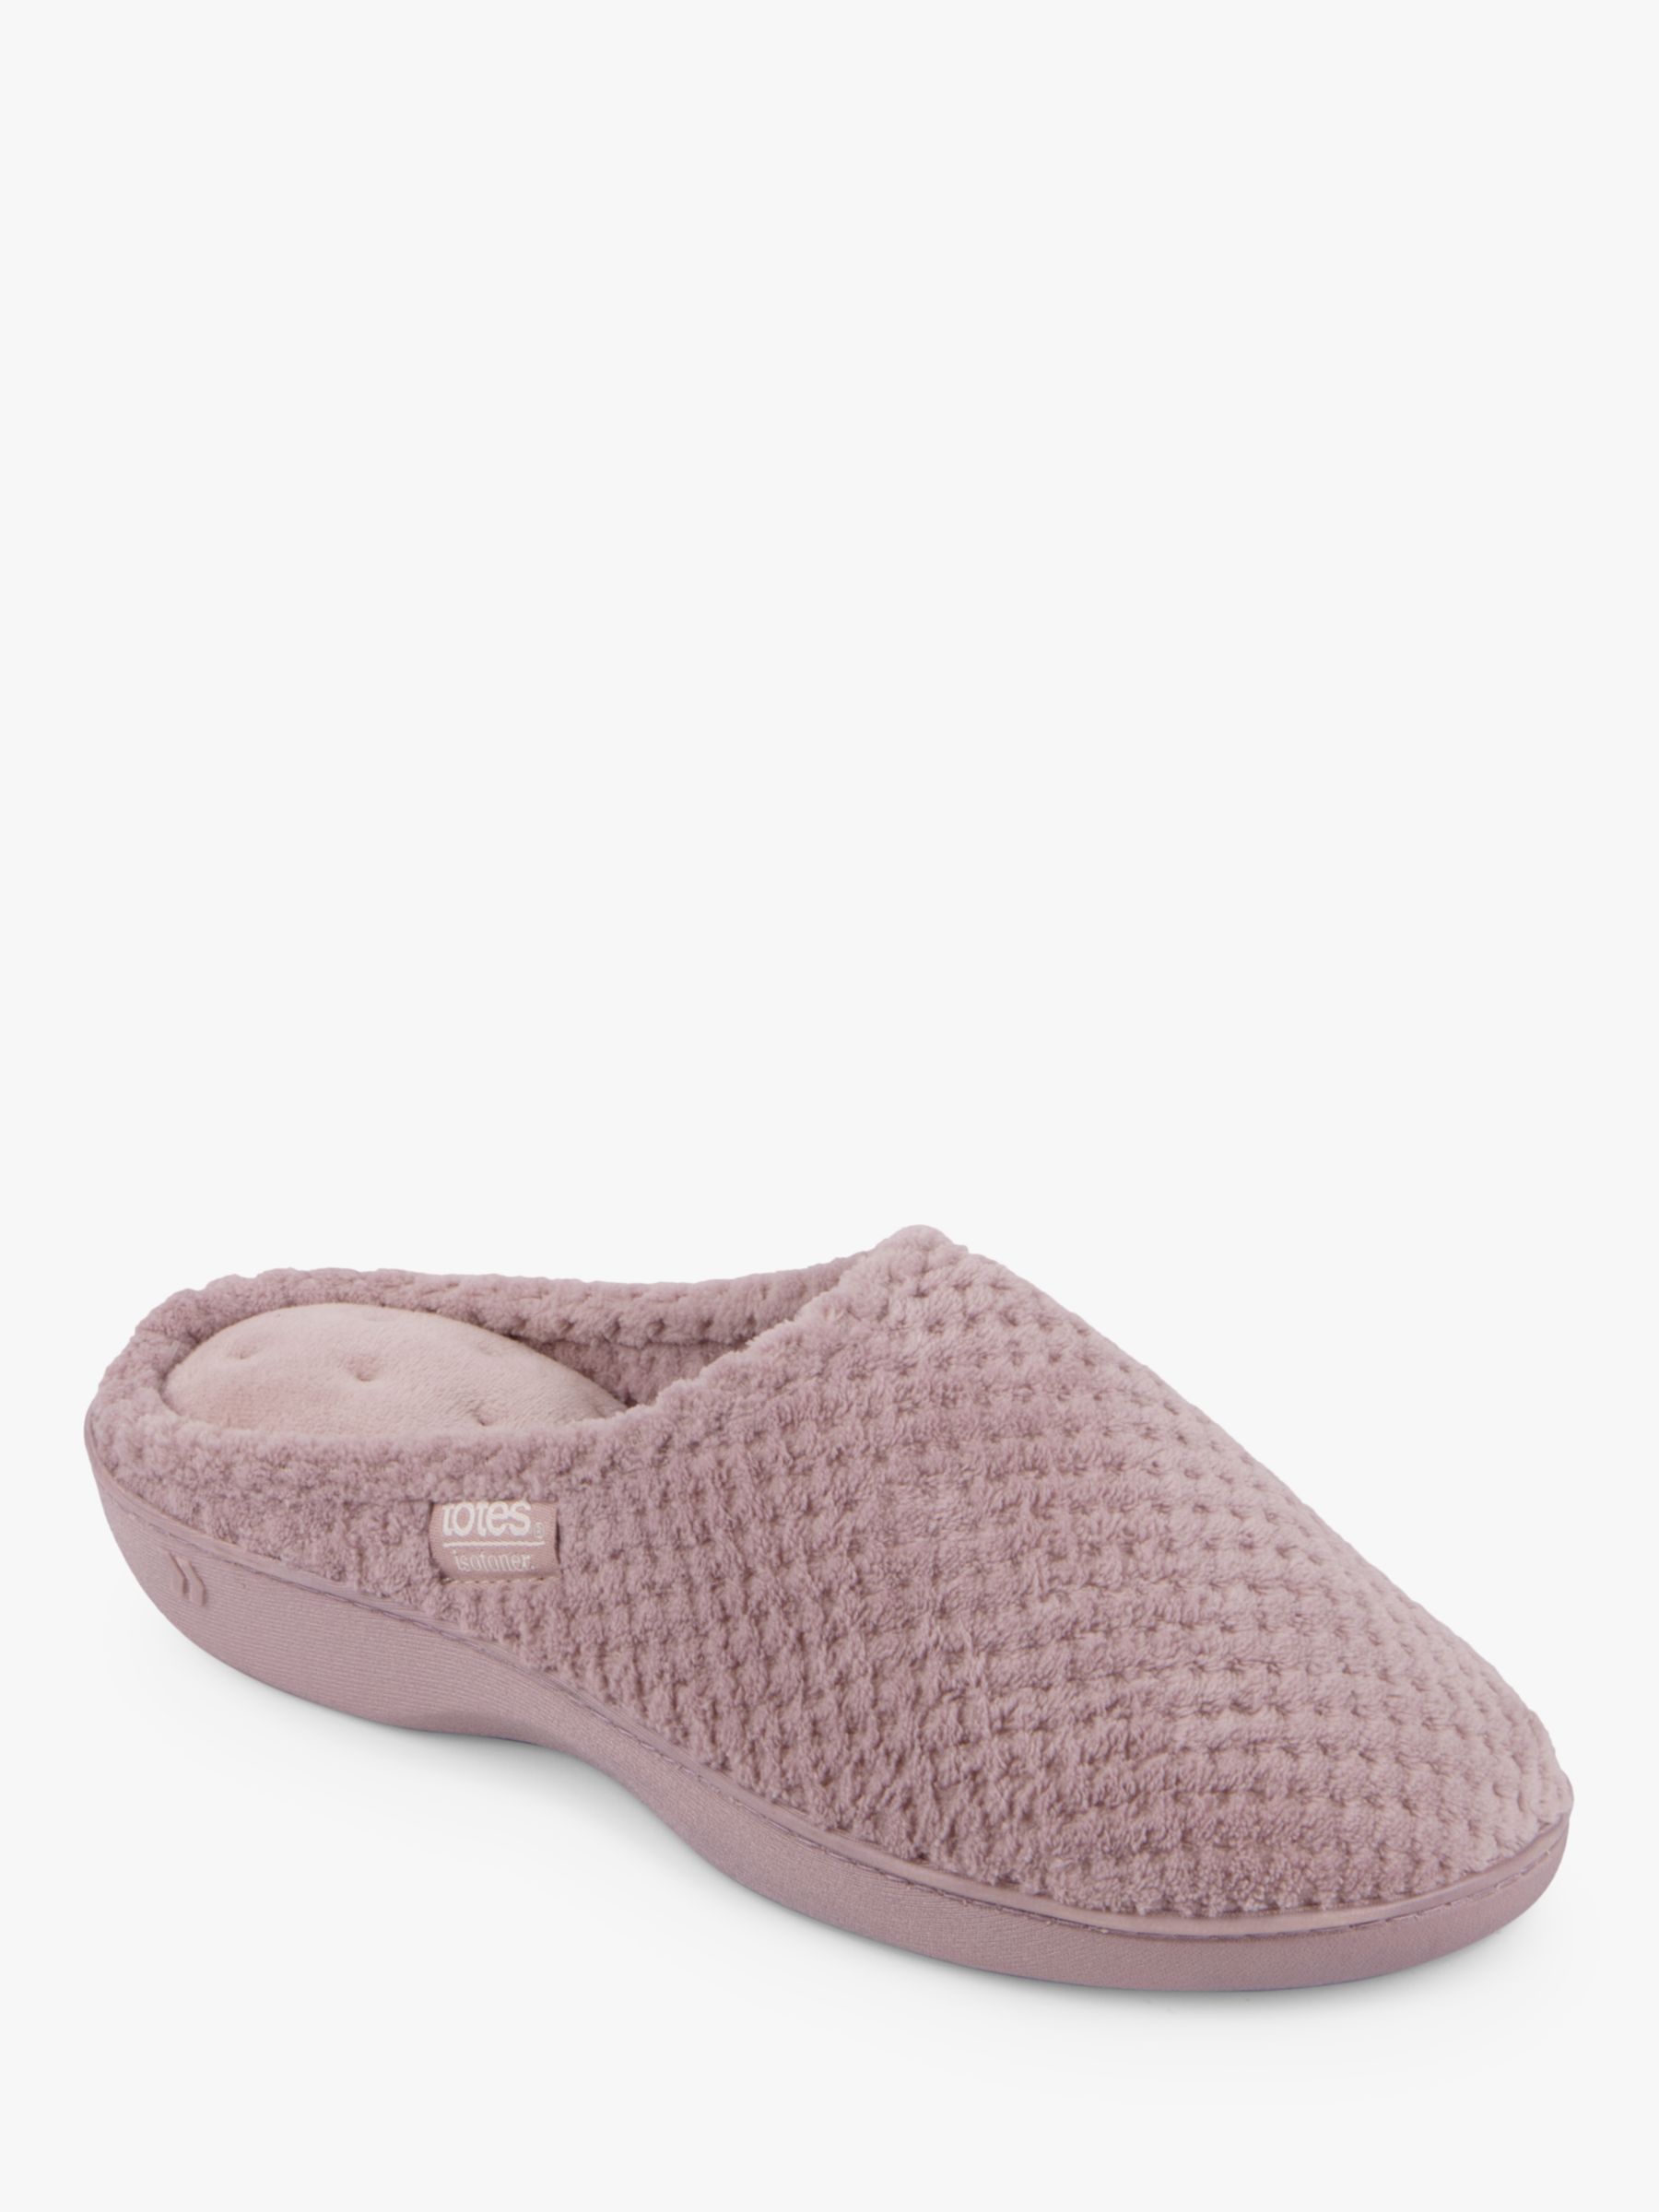 totes Popcorn Terry Mule Slippers, Dusky Pink at John Lewis & Partners